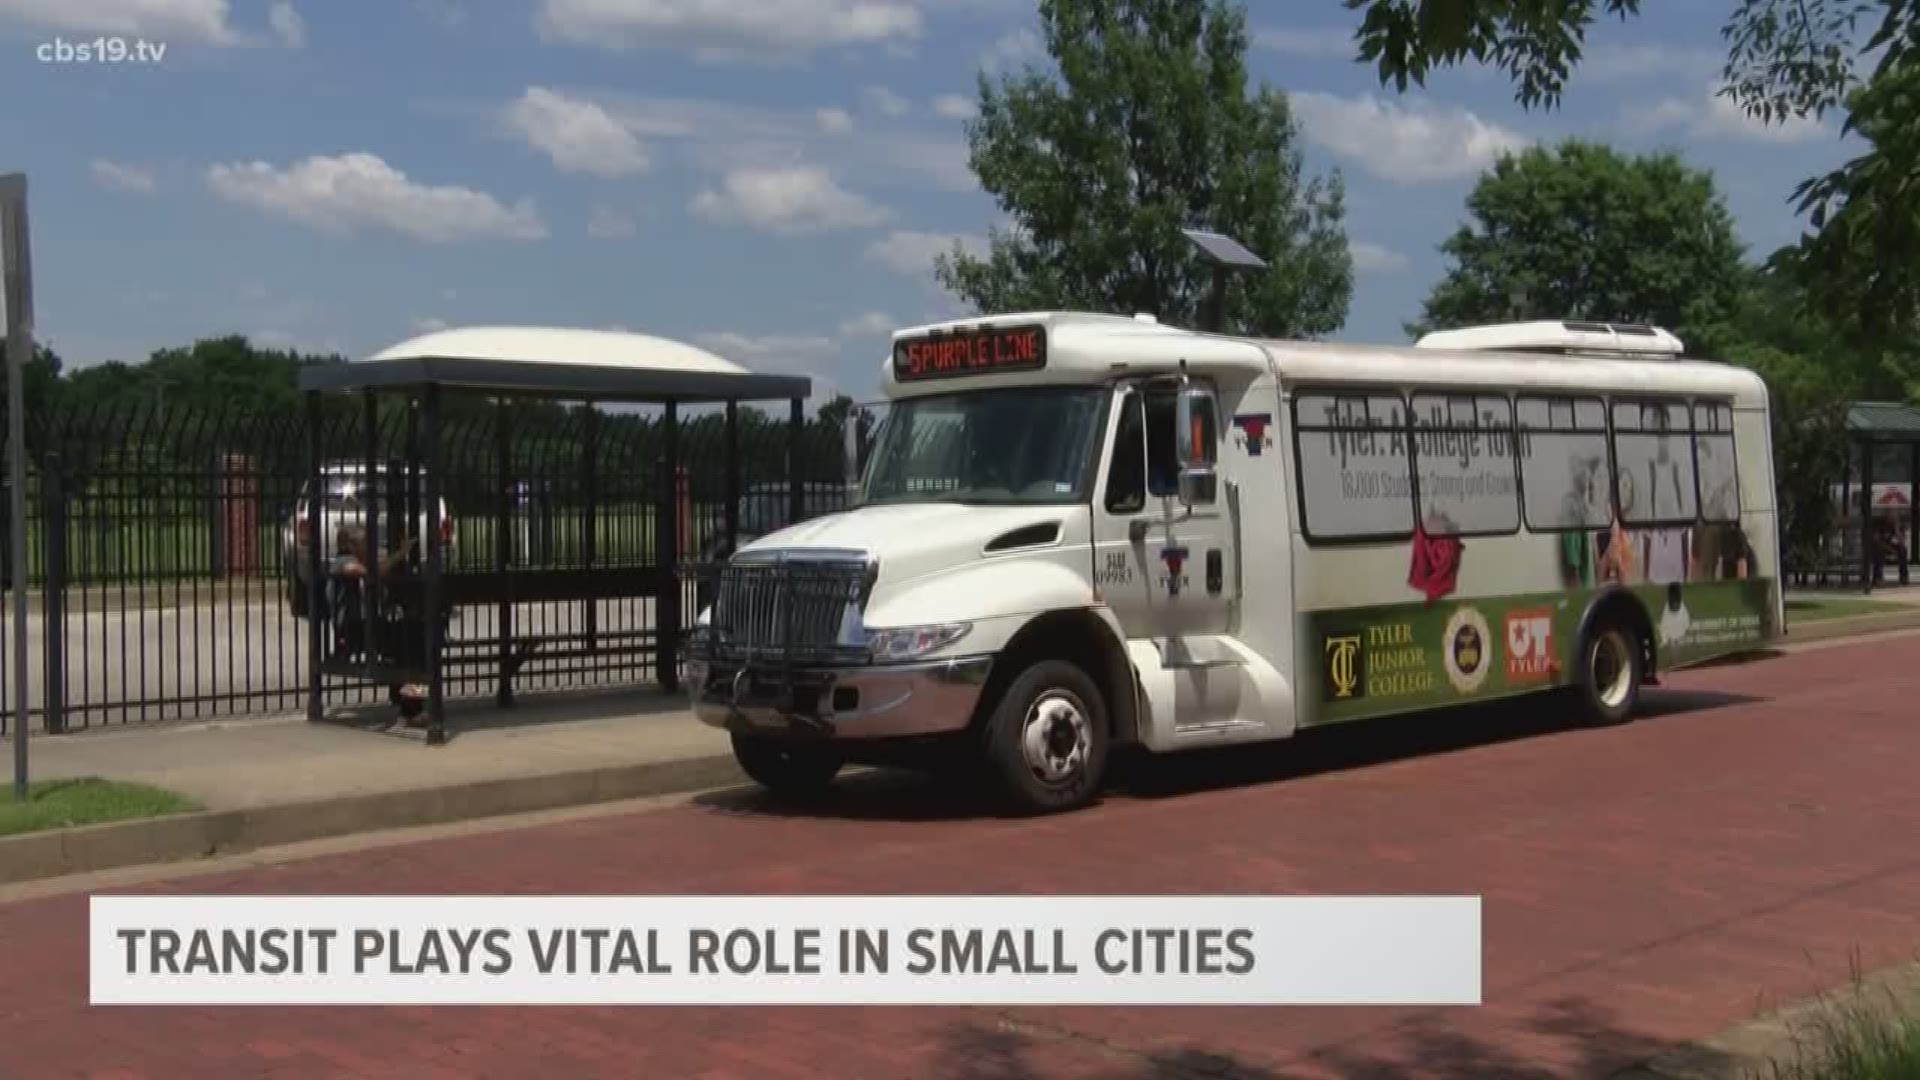 Leaders with the city of Tyler Transit team explains what it means to provide access to affordable, reliable means of transportation, but some riders argue the city's bus system still has flaws.